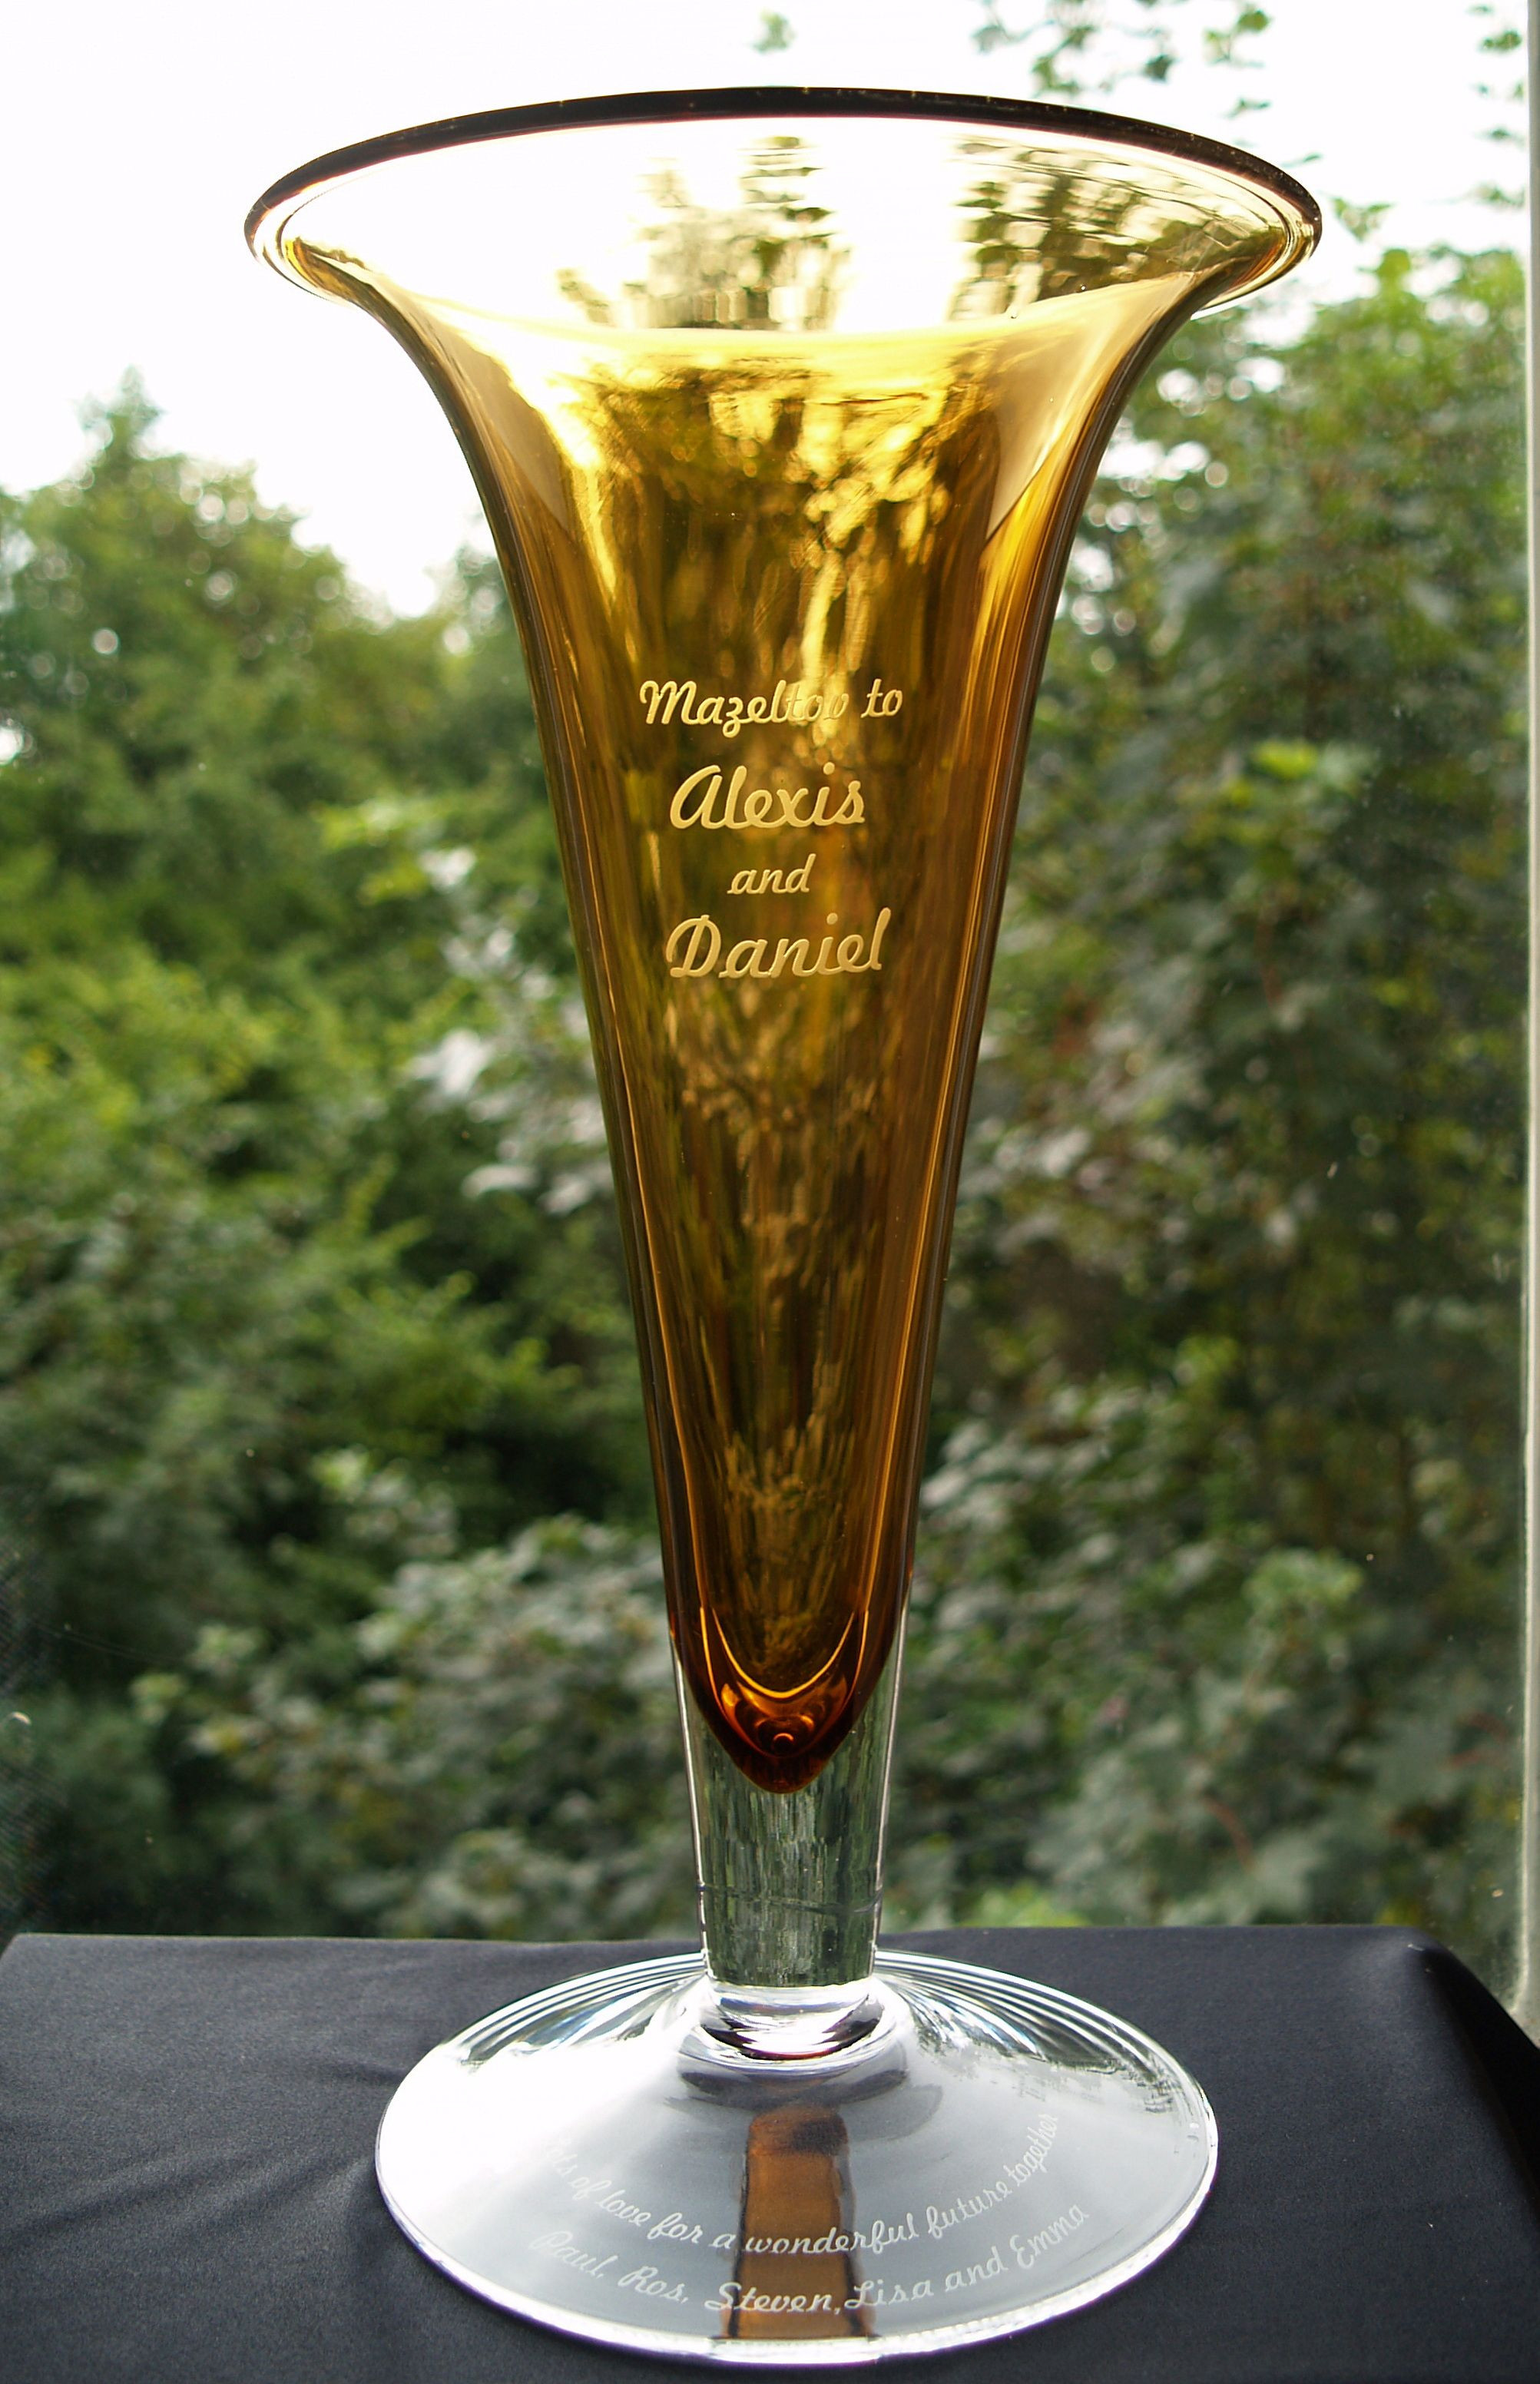 personalized glass vase of heres our gorgeous orange blossom vase engraved by frosted lime on within heres our gorgeous orange blossom vase engraved by frosted lime on the body and base